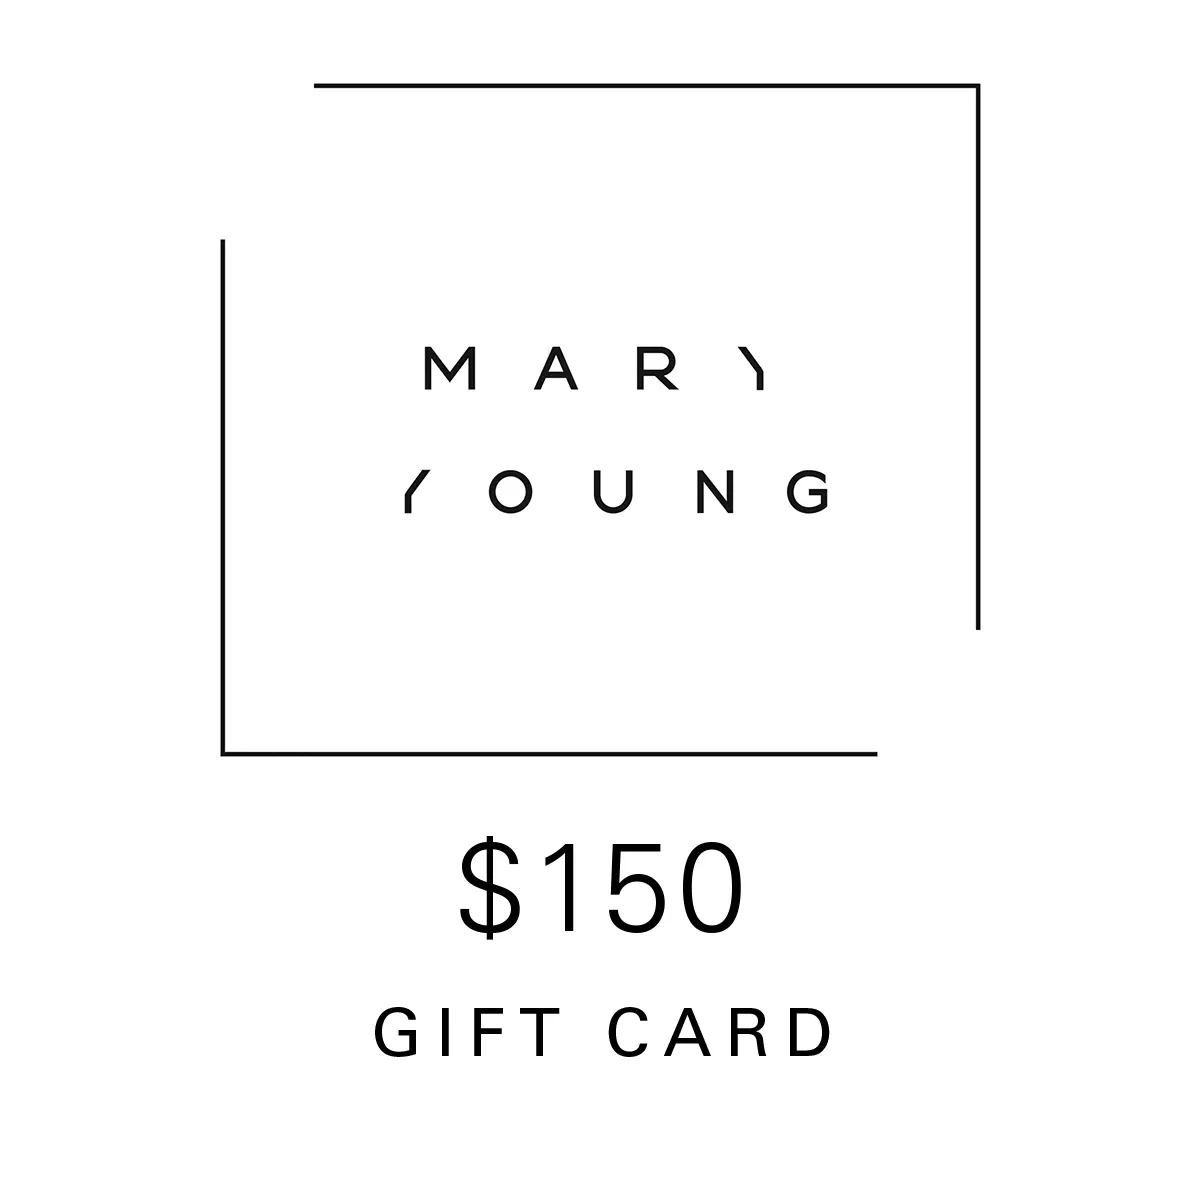 MARY YOUNG Profile photo 16